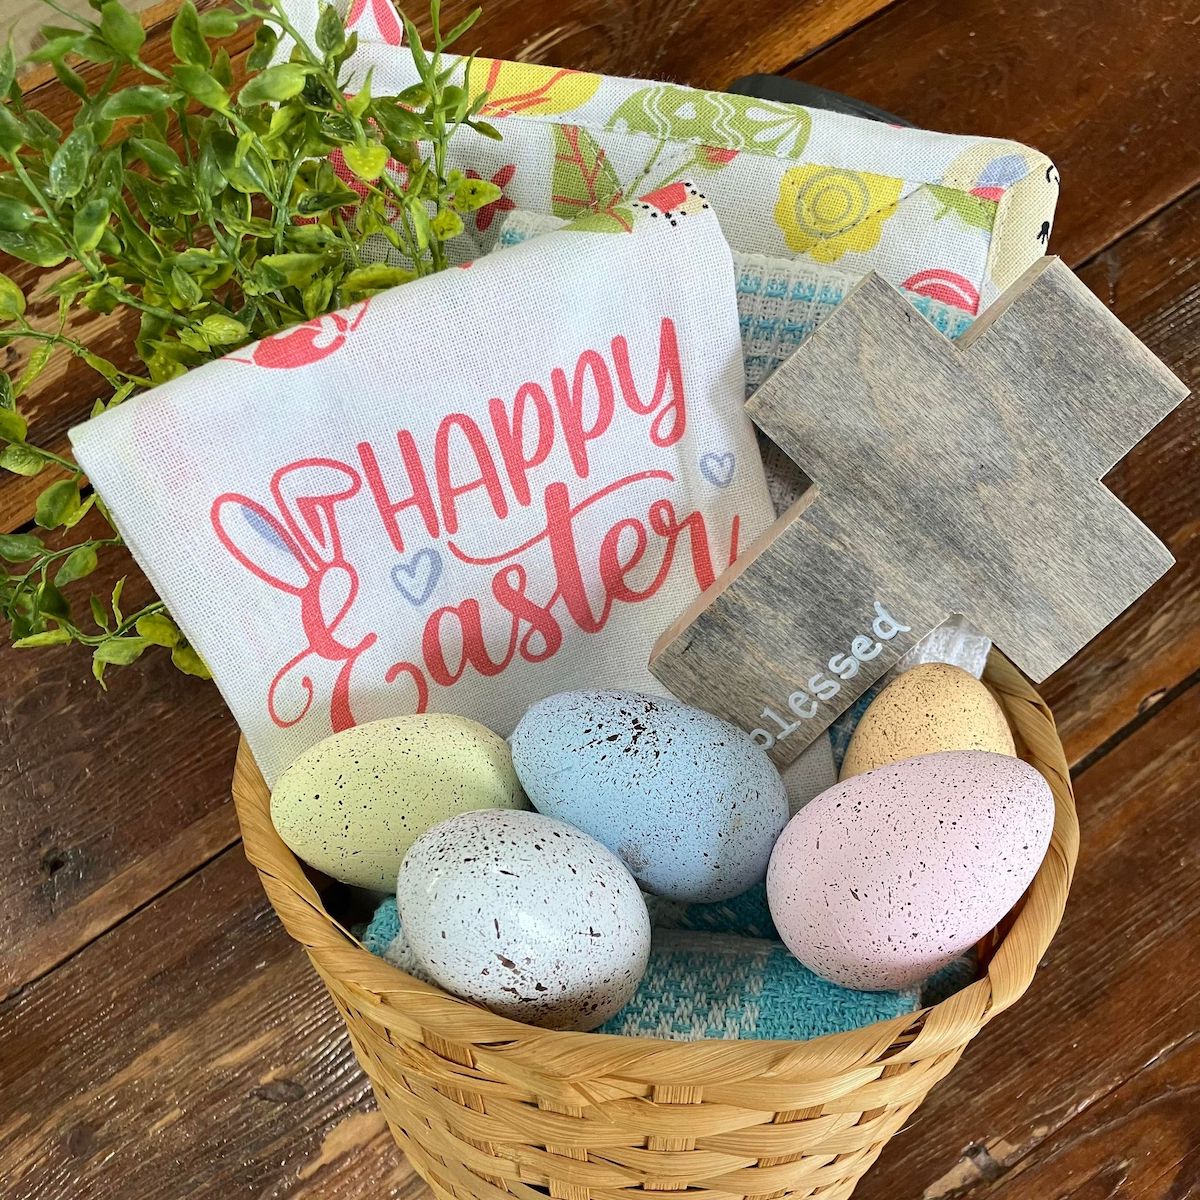 Easter Gift Basket: Kitchen Towel, Pot Holder, Wooden Eggs and Cross with Green Sprig